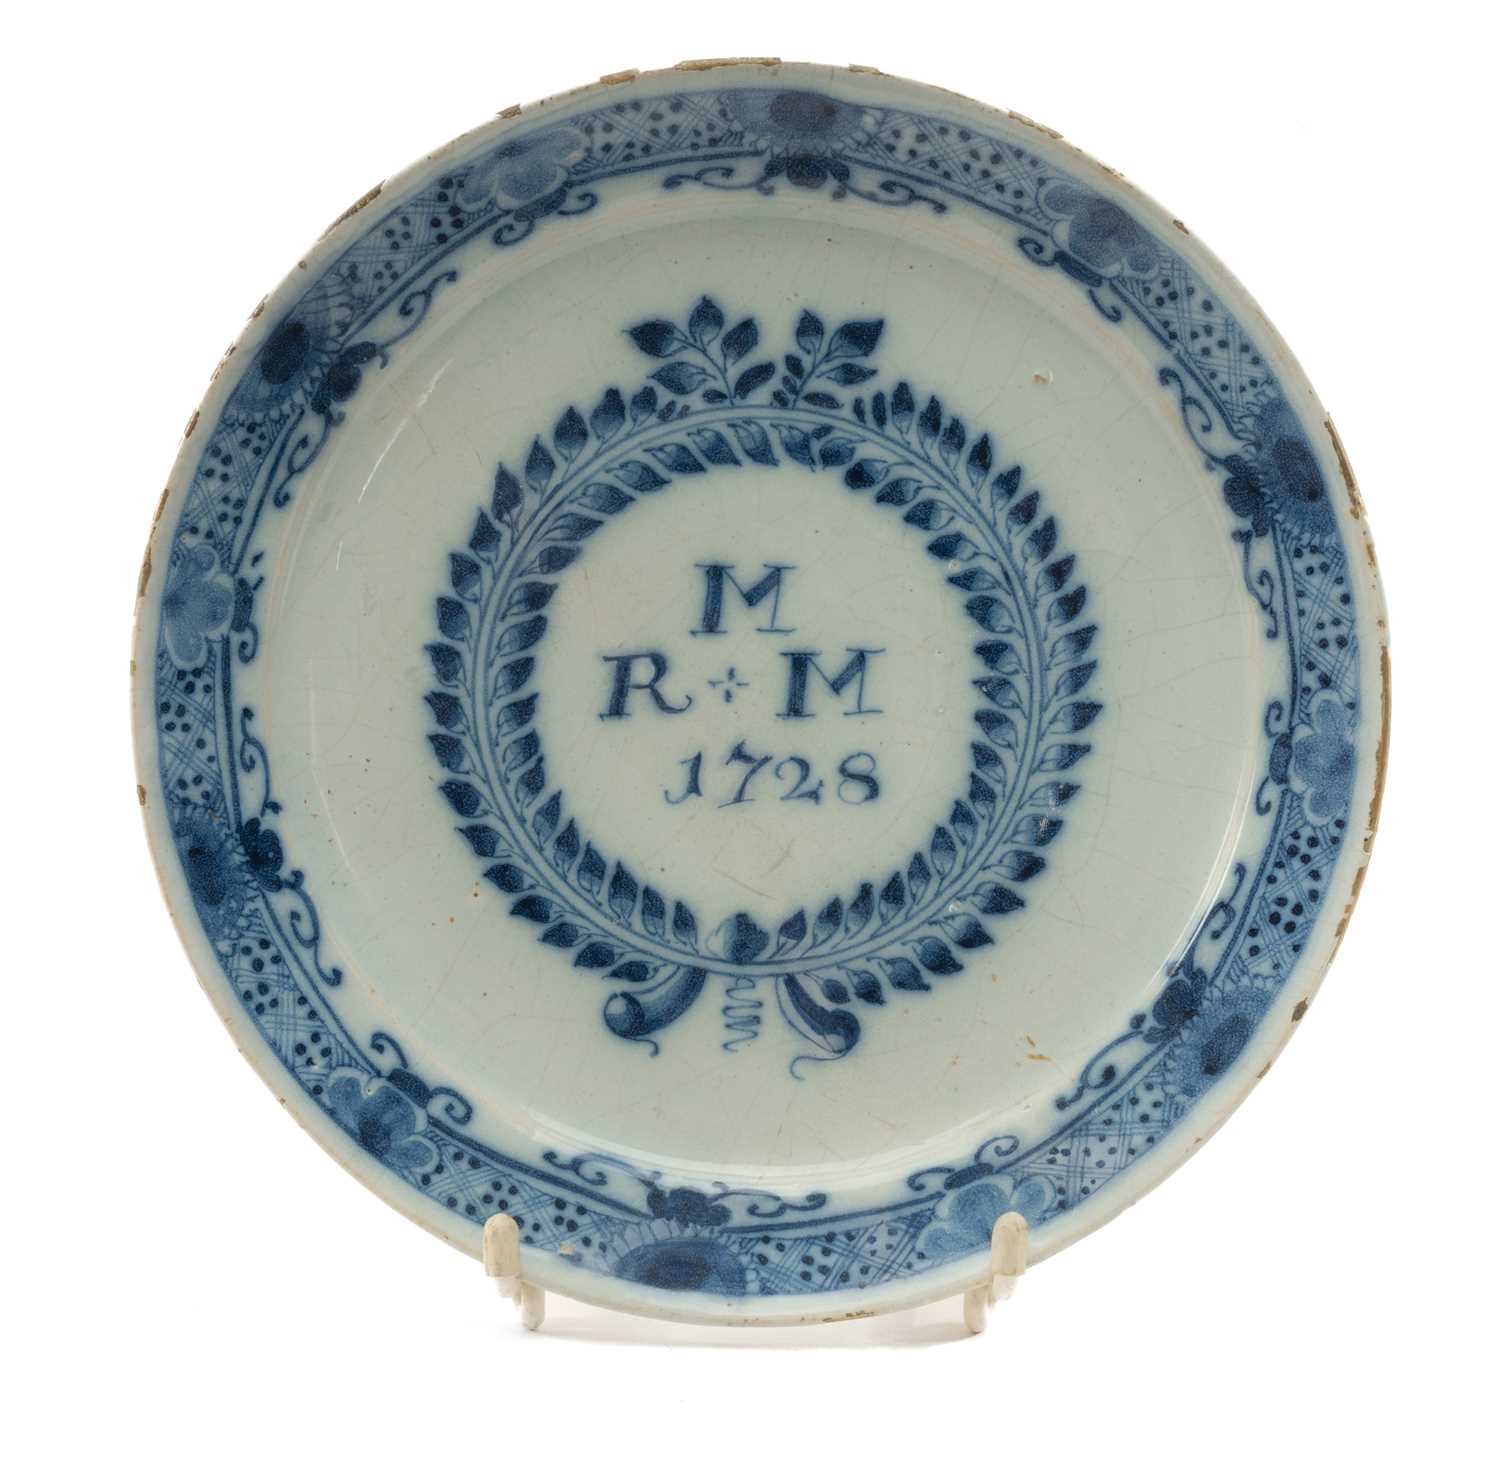 GEORGE II ENGLISH DELFT MARRIAGE PLATE, dated 1728, centre painted with initials 'R+M M' within